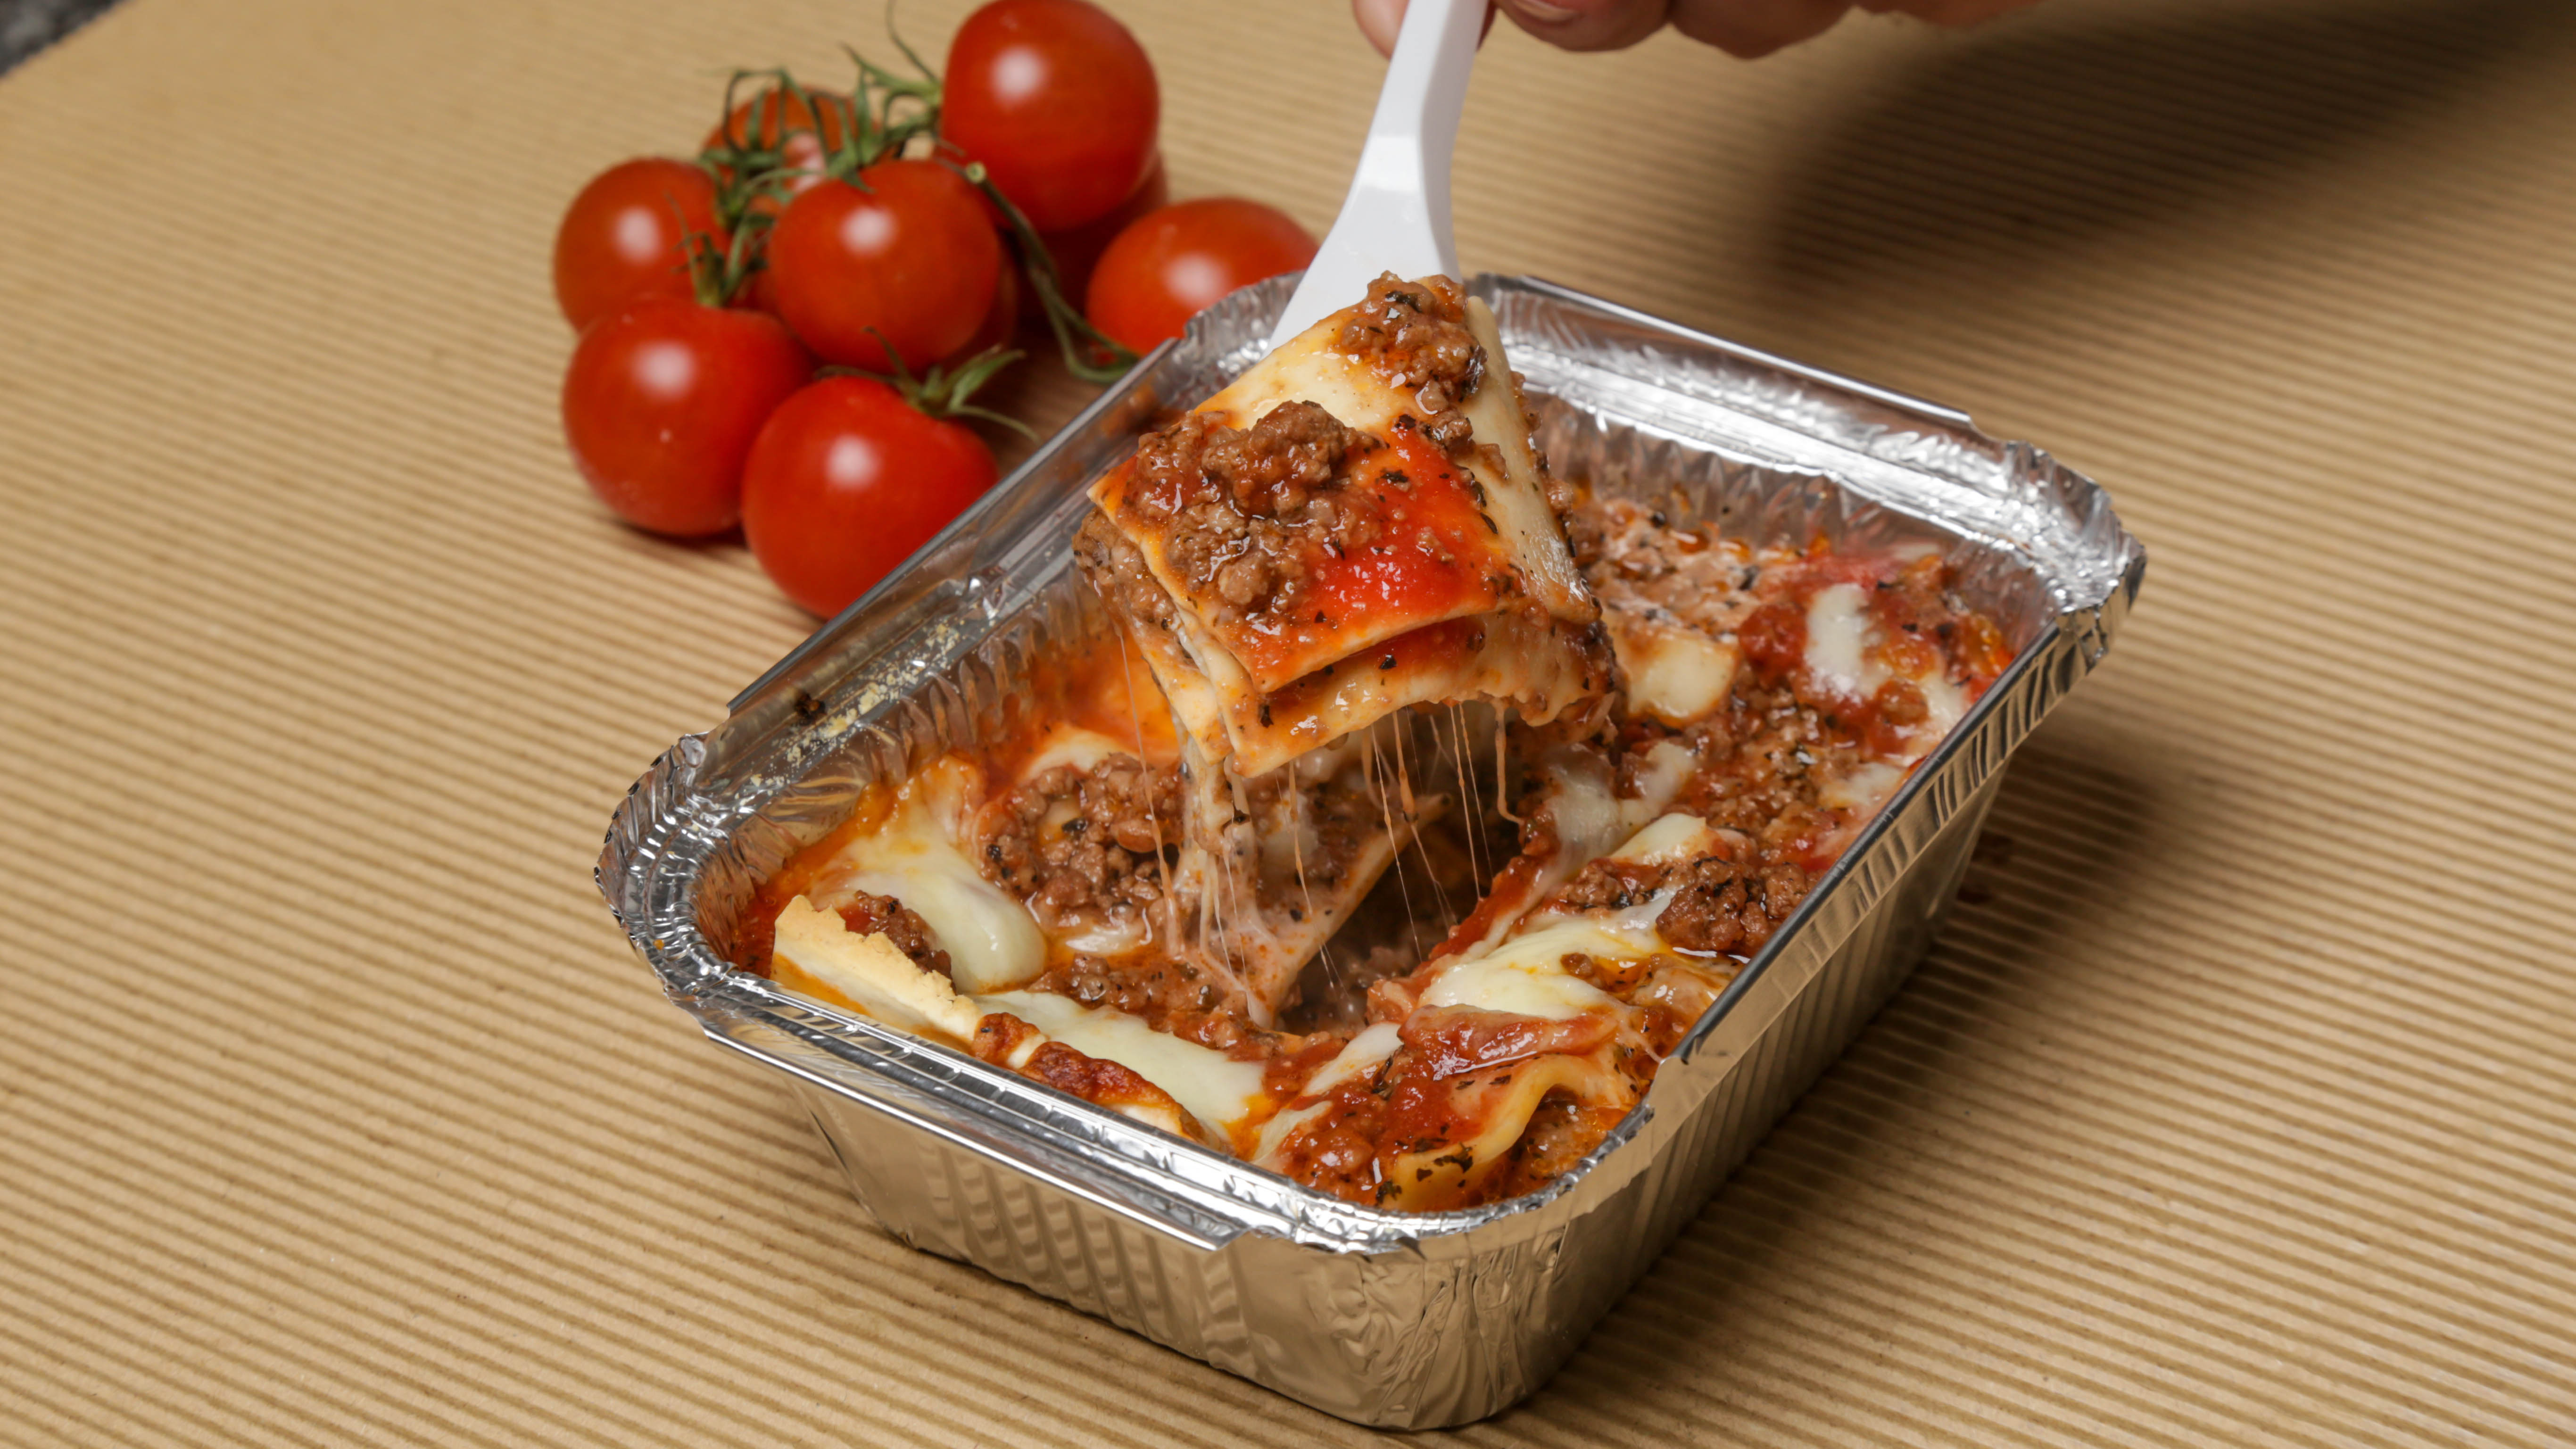 Aluminum foil container for food